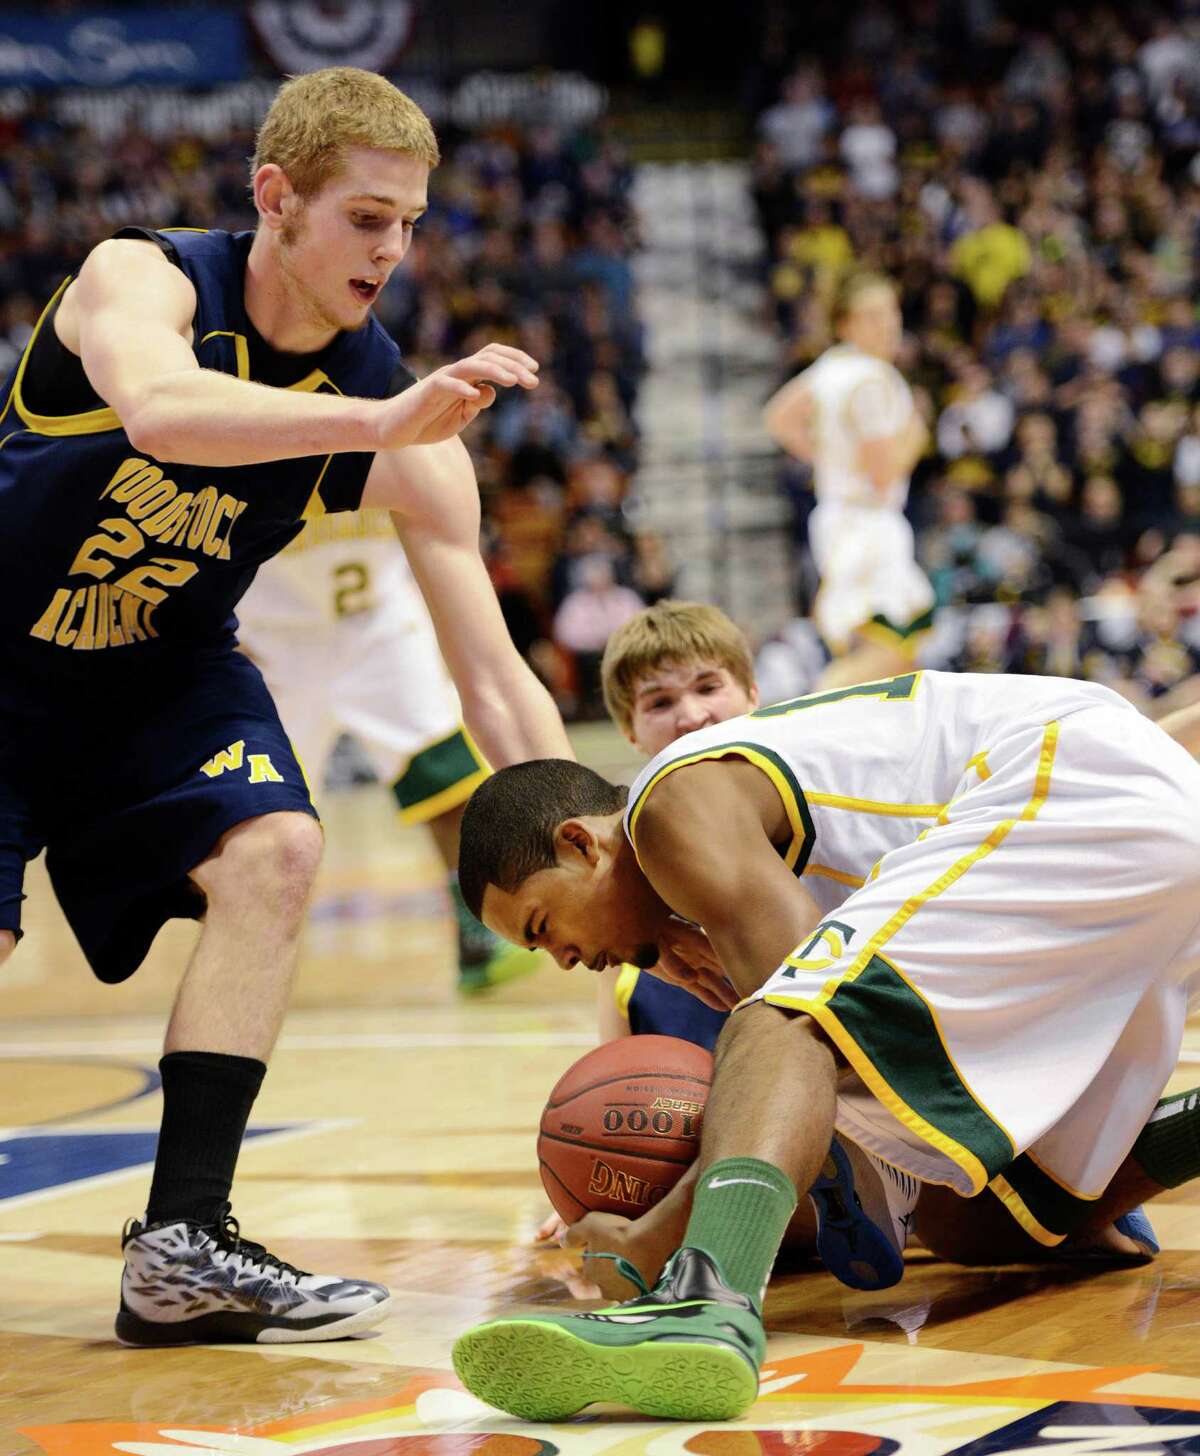 Neno Merritt, Trinity Catholic High School, fights for a loose ball in the CIAC class L boys basketball championship game against Woodstock Academy at Mohegan Sun Arena in Uncasville, Conn. on Saturday, March 16, 2013.